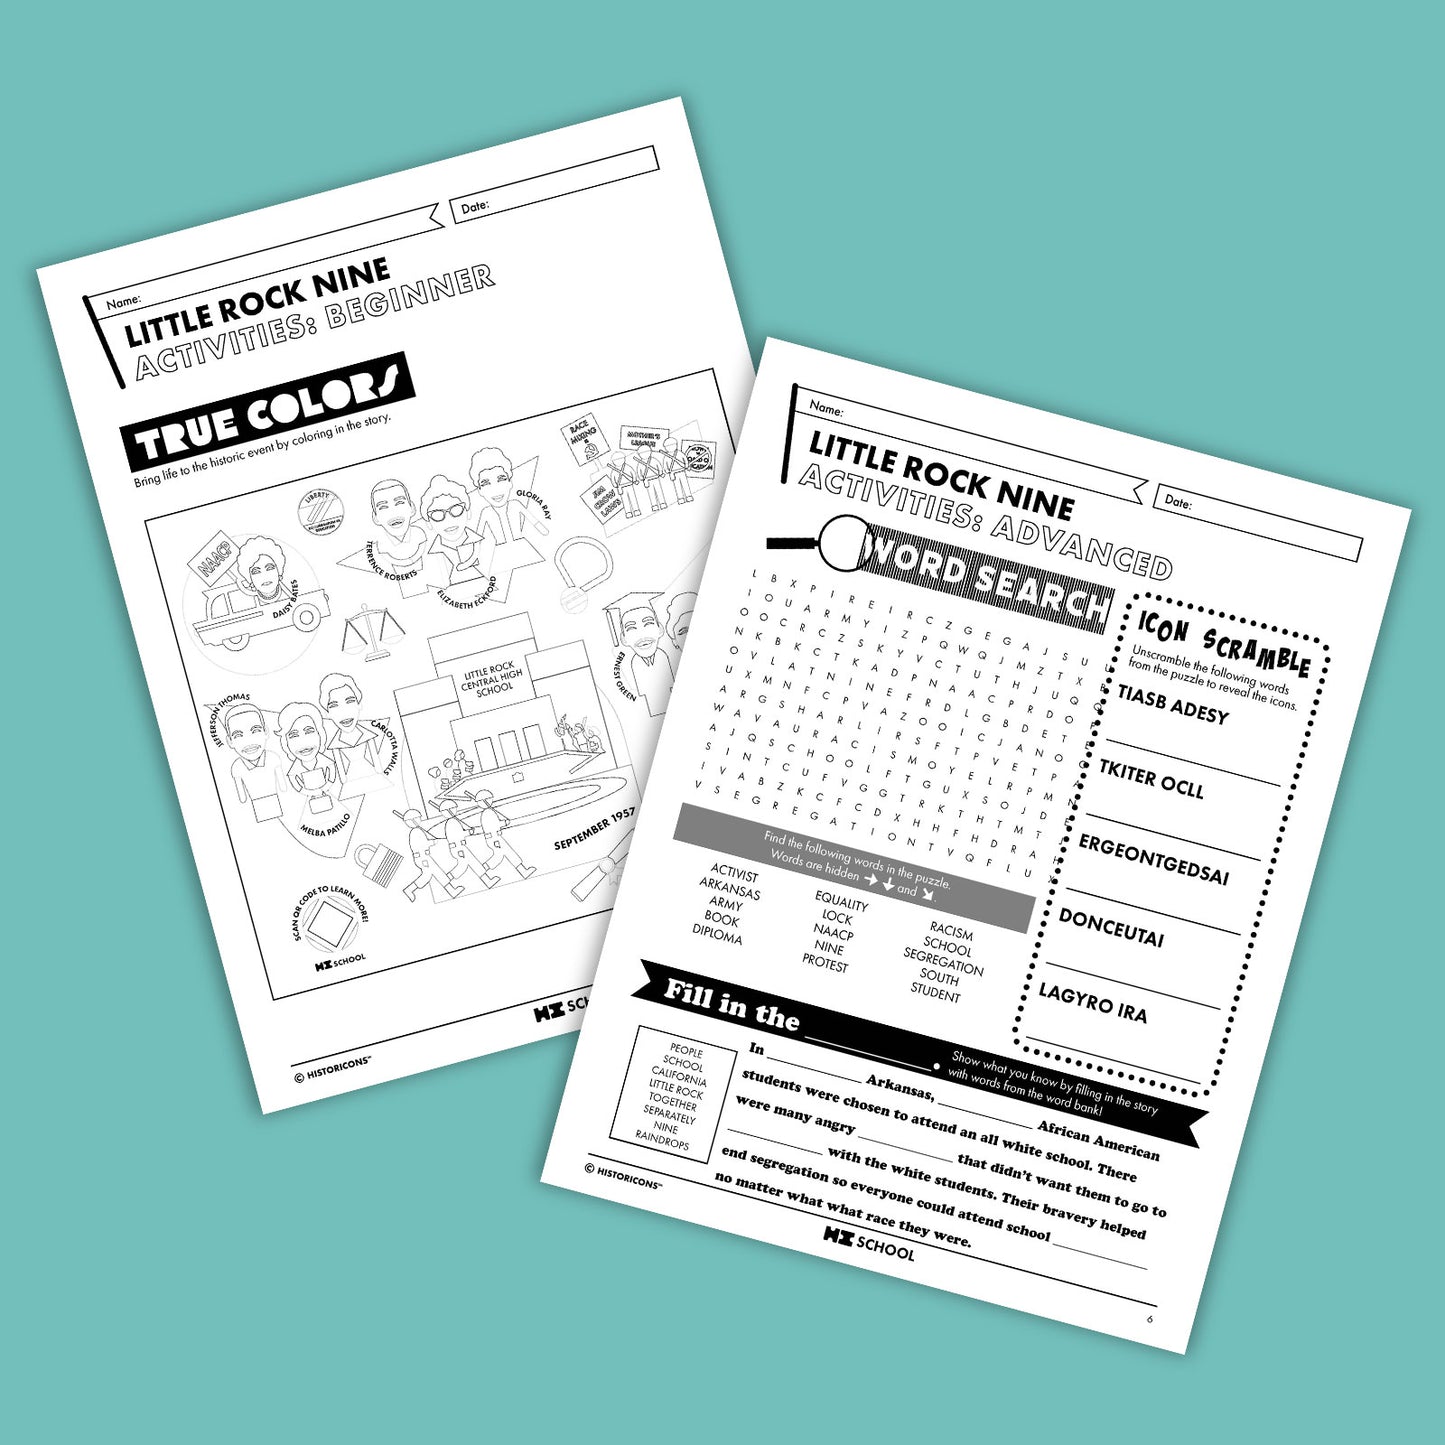 Two pages of the HI School Little Rock Nine Activity Pack are pictured. One page is titled "Little Rock Nine Activities: Beginner" and includes a coloring page of civil rights heroes. Another page is titled "Little Rock Nine Activities: Advanced" and includes a word search, icon scramble, and fill in the blank activity.